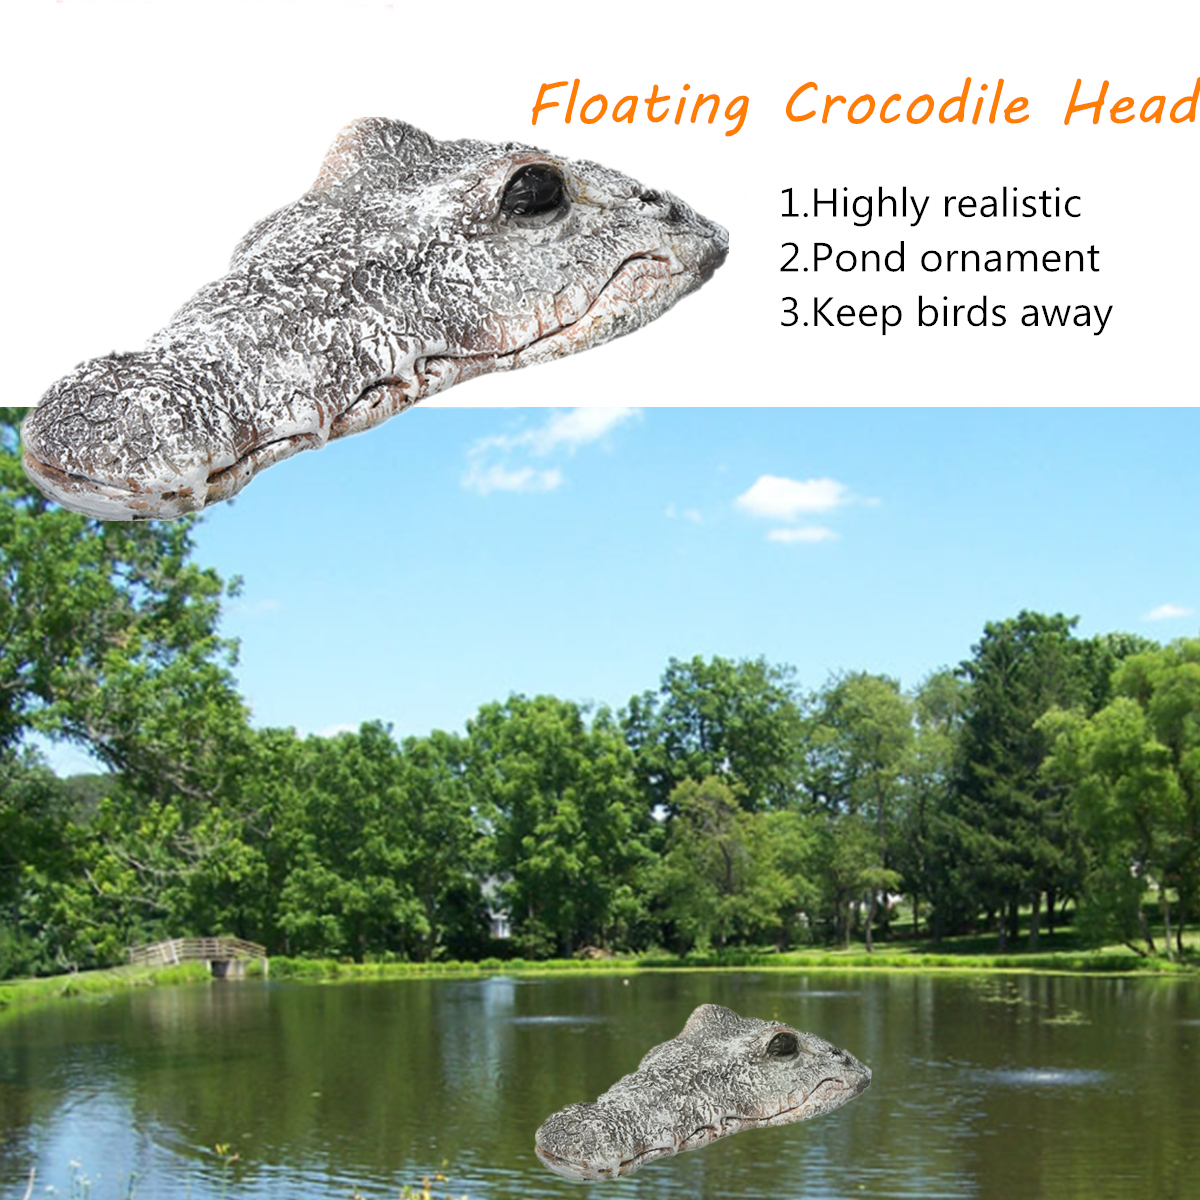 Floating-Resin-Crocodile-Head-Garden-Pond-Pool-Realistic-Water-Features-Decorations-Pool-Ornament-1348728-1